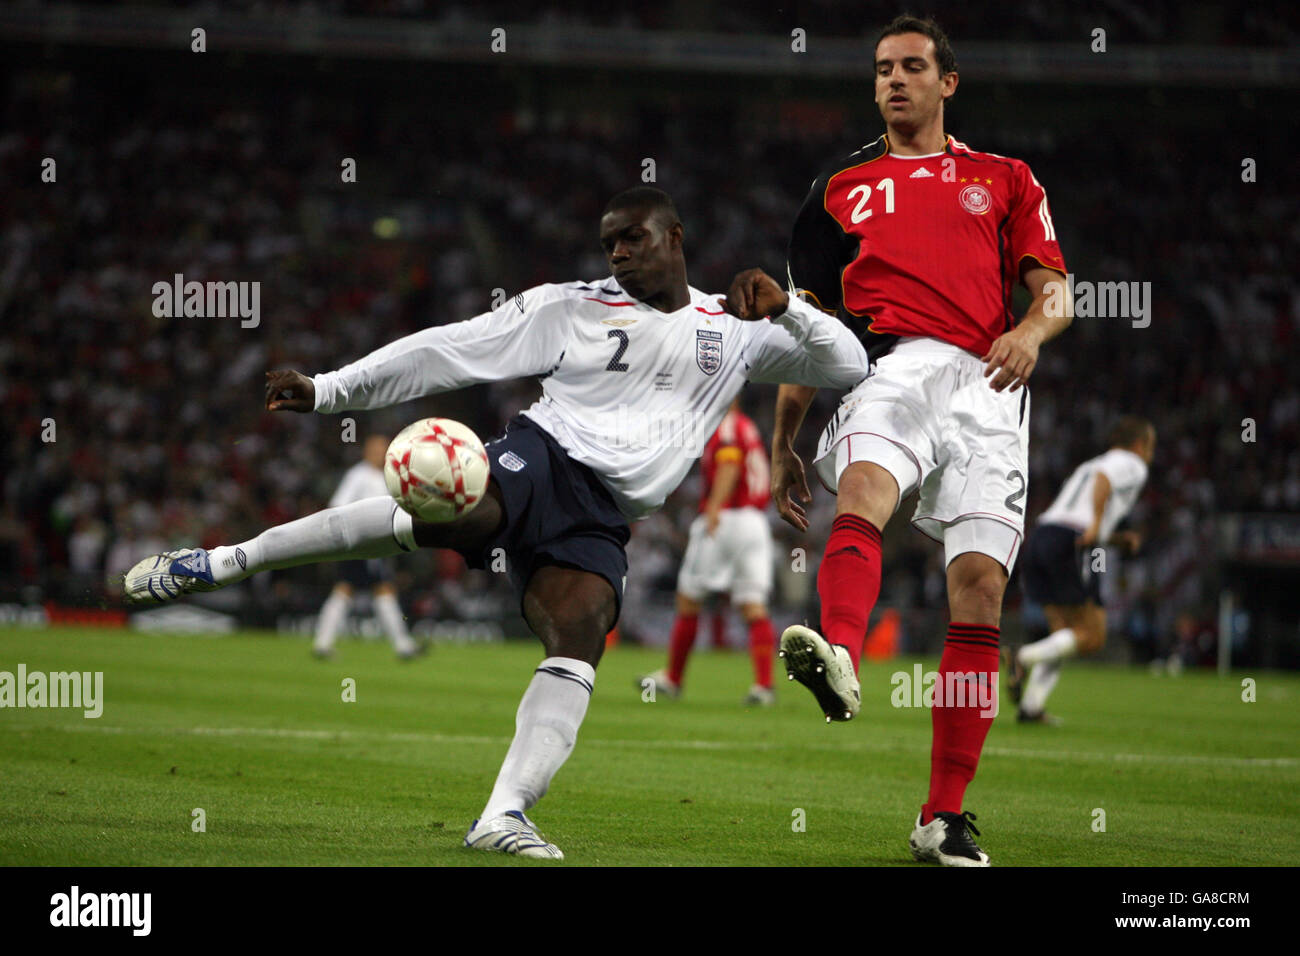 Soccer - International Friendly - England v Germany - Wembley Stadium. Germany's Christoph Metzelder (r) and England's Micah Richards (l) battle for the ball Stock Photo